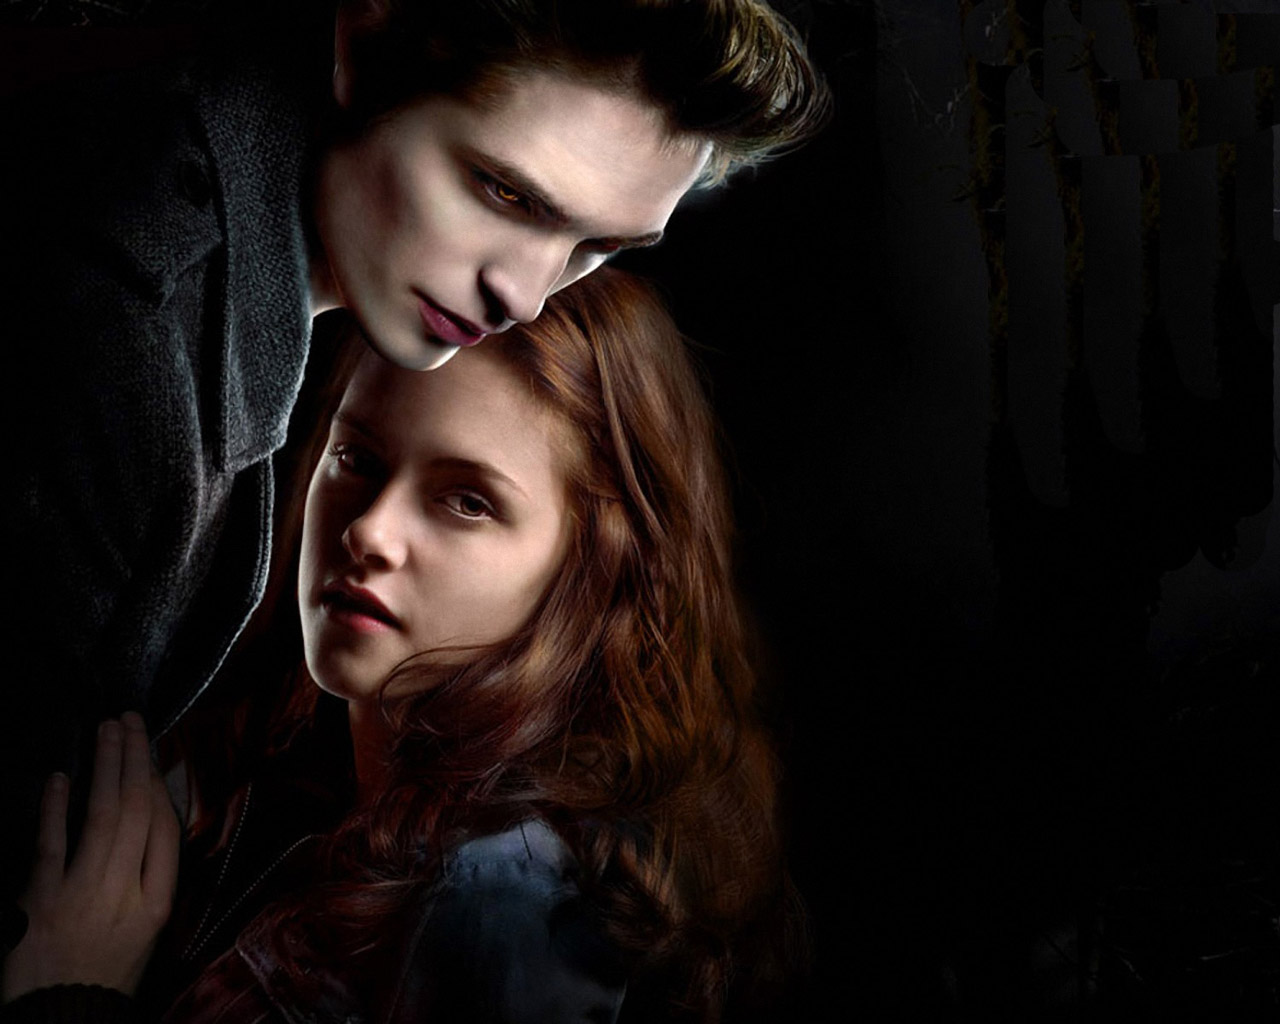 Twilight HD 1280x1024 Wallpapers, 1280x1024 Wallpapers & Pictures ...